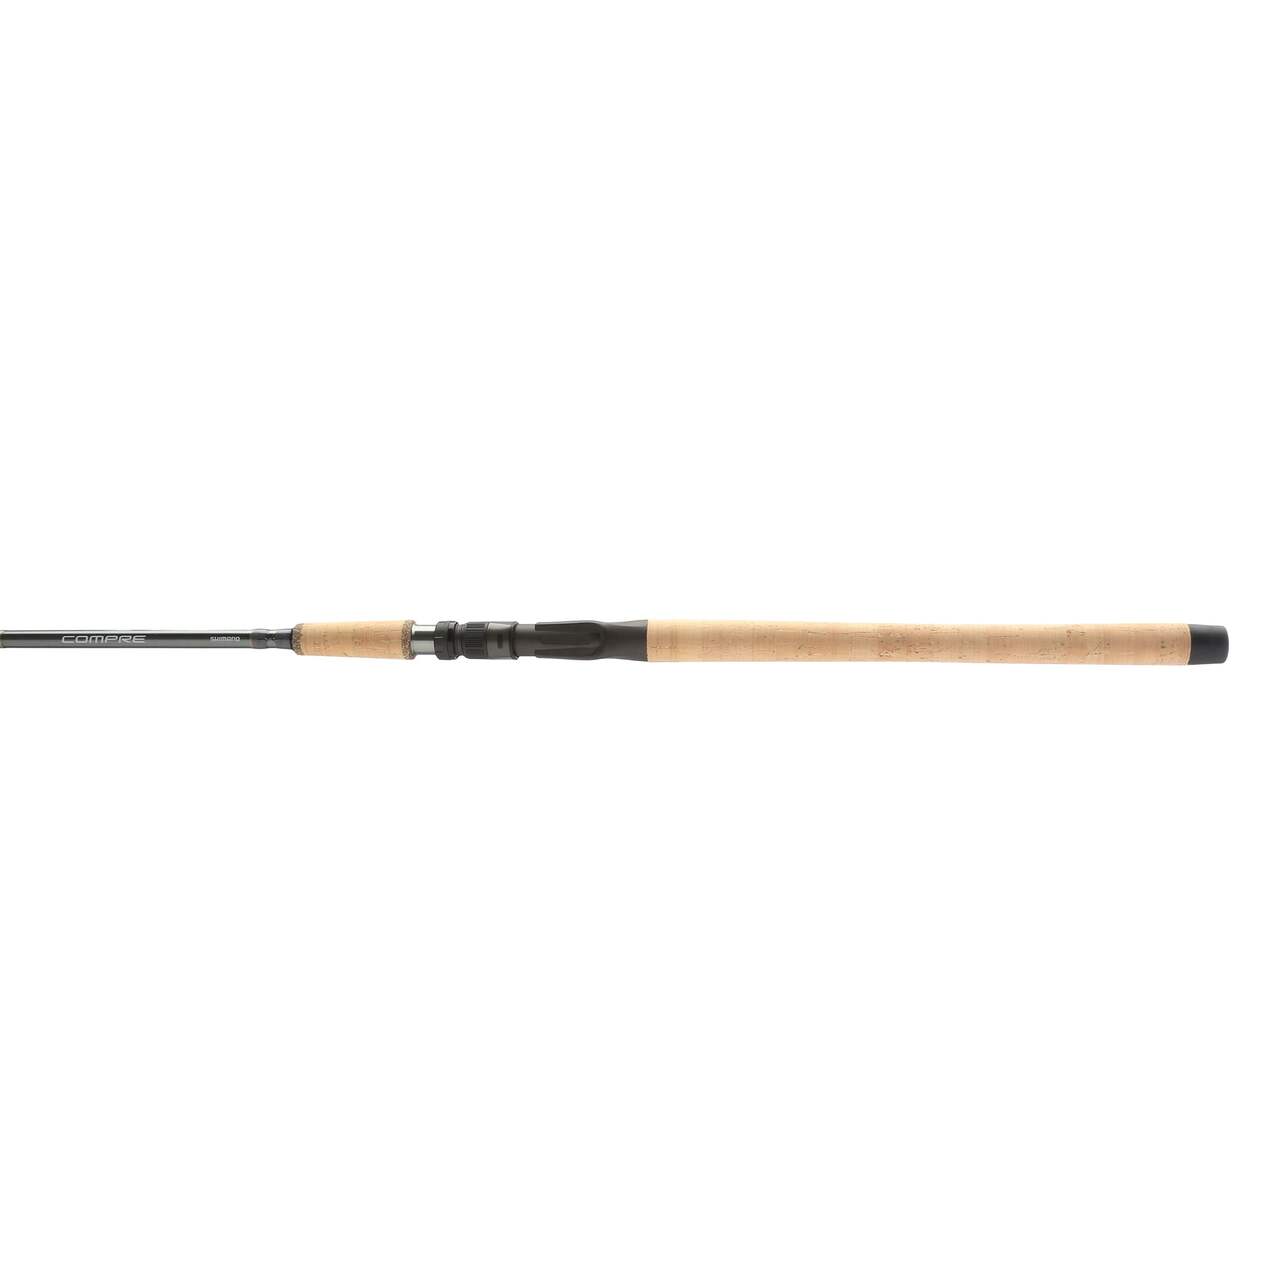 https://media-www.canadiantire.ca/product/playing/fishing/fishing-equipment/1786112/-shm-compre-bc-cst-10-6-mh--47a8e403-6eba-4001-b926-ecf7ea587de7-jpgrendition.jpg?imdensity=1&imwidth=1244&impolicy=mZoom